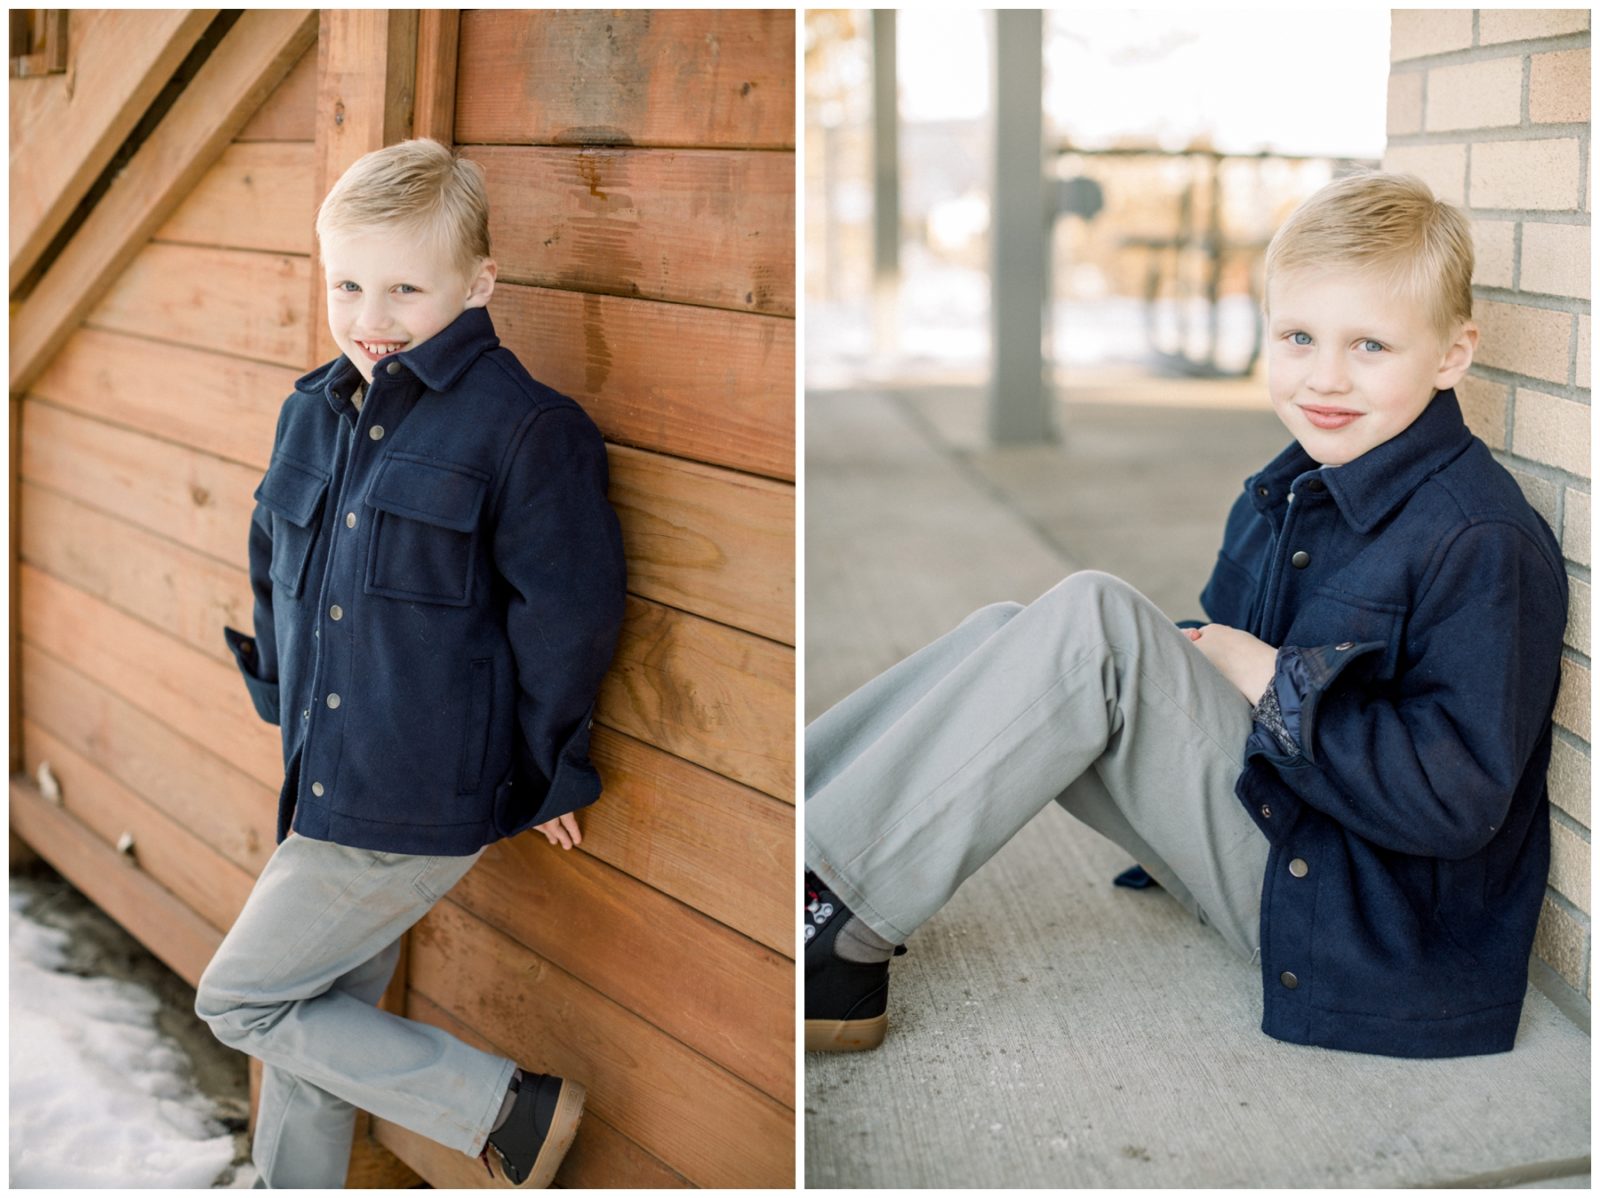 Boy making poses and smiling for pictures. There's snow and the weather seems cold.